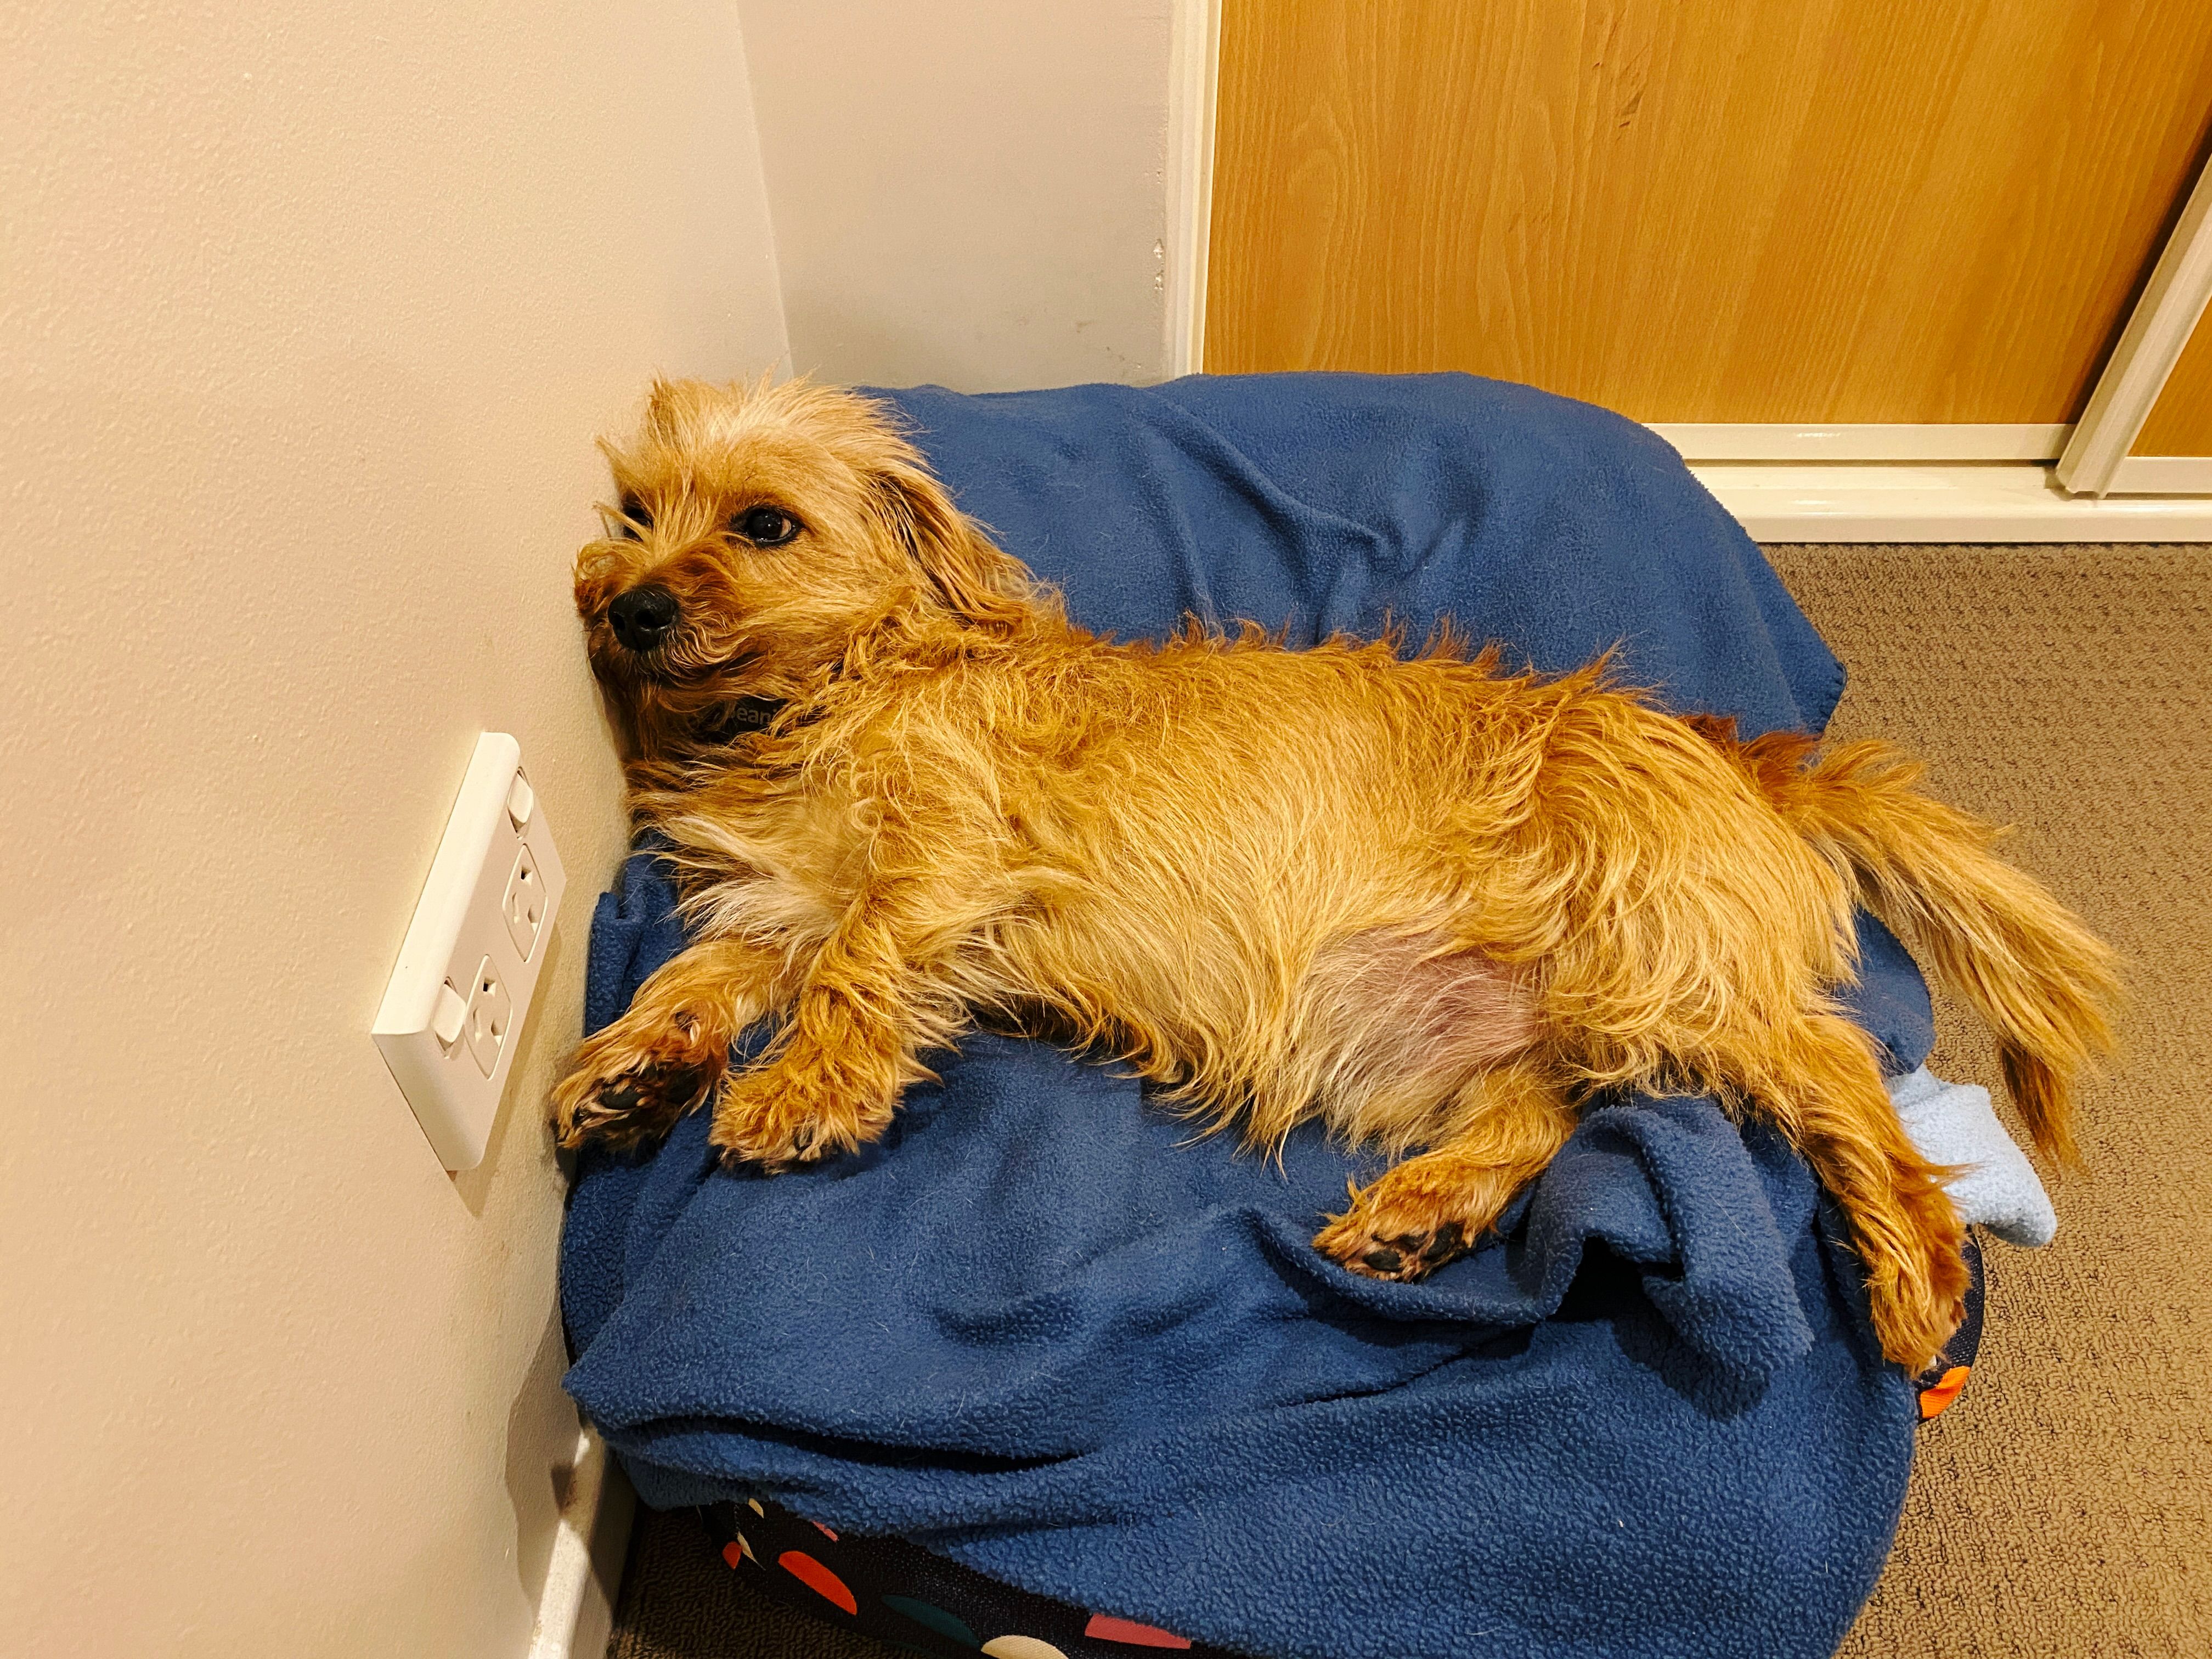 A photo of a small scruffy blonde dog lying in a dog bed that's sitting against a wall. He's lying on his side but has his head jammed up at an angle against the wall, and his facial hair is all munted-looking.